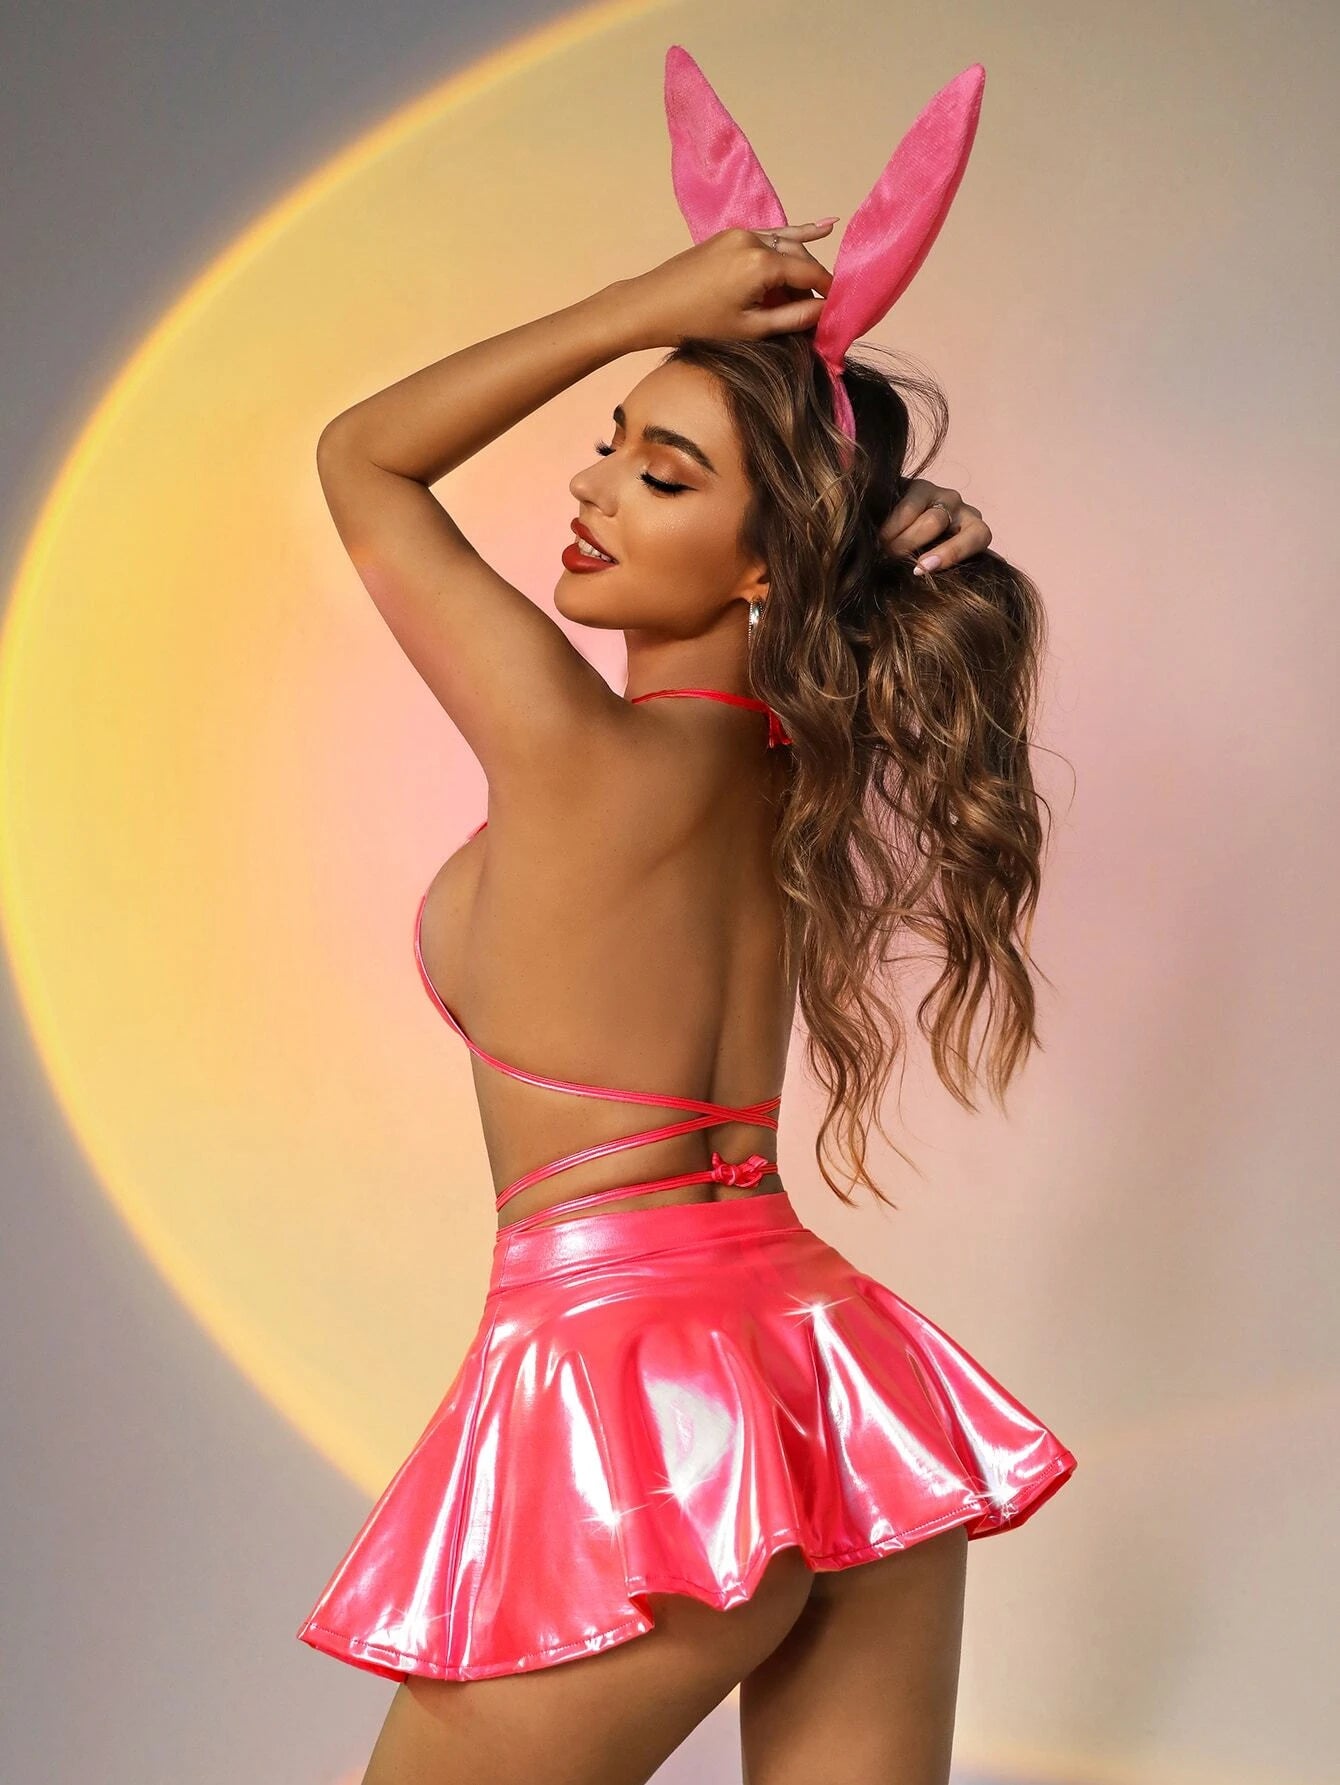 Sexy Bunny Cosplay Costume - This costume includes a pink, stretchy, and comfortable outfit, featuring a charming bunny ear headband. Perfect for playful and seductive moments, whether at parties or for intimate evenings with your partner. Hand wash for easy care. Discreet packaging included. Add excitement to your life with this enchanting bunny costume.